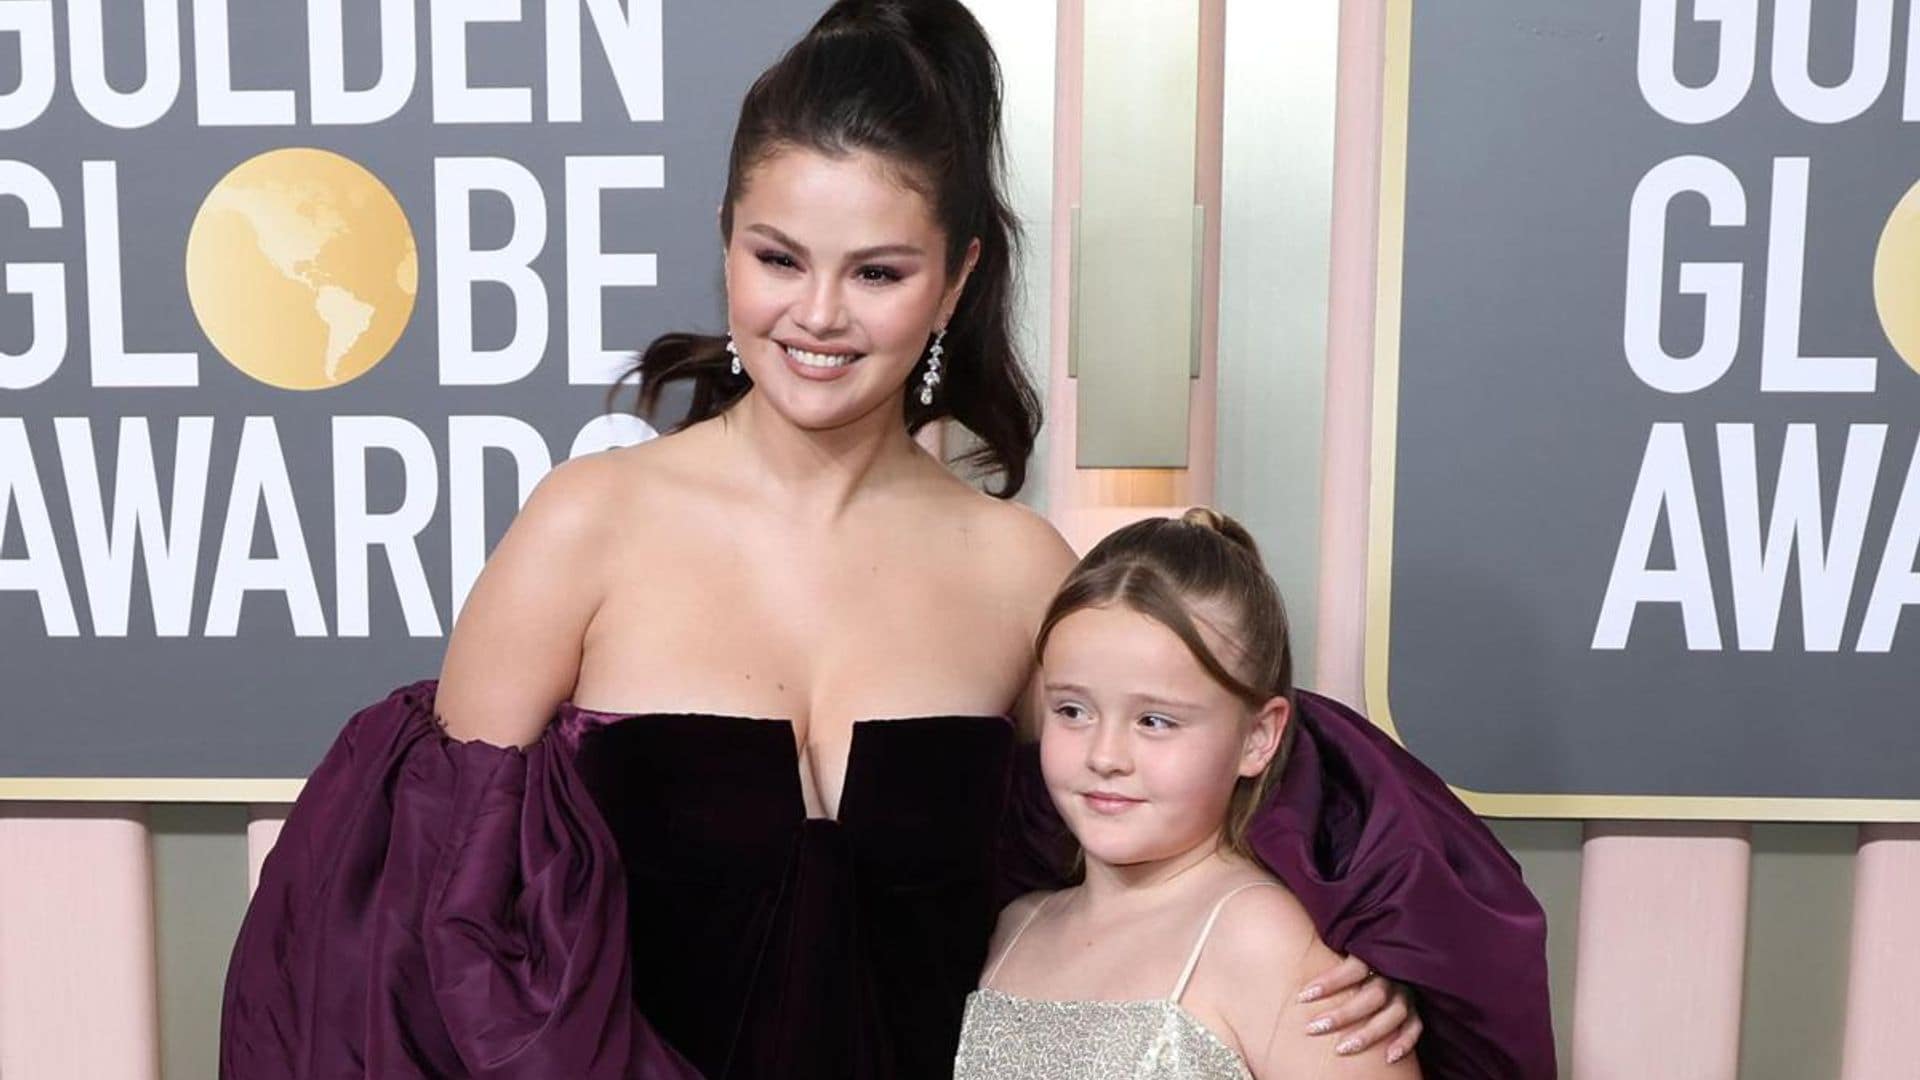 Selena Gomez shares adorable photo with her ‘little me’